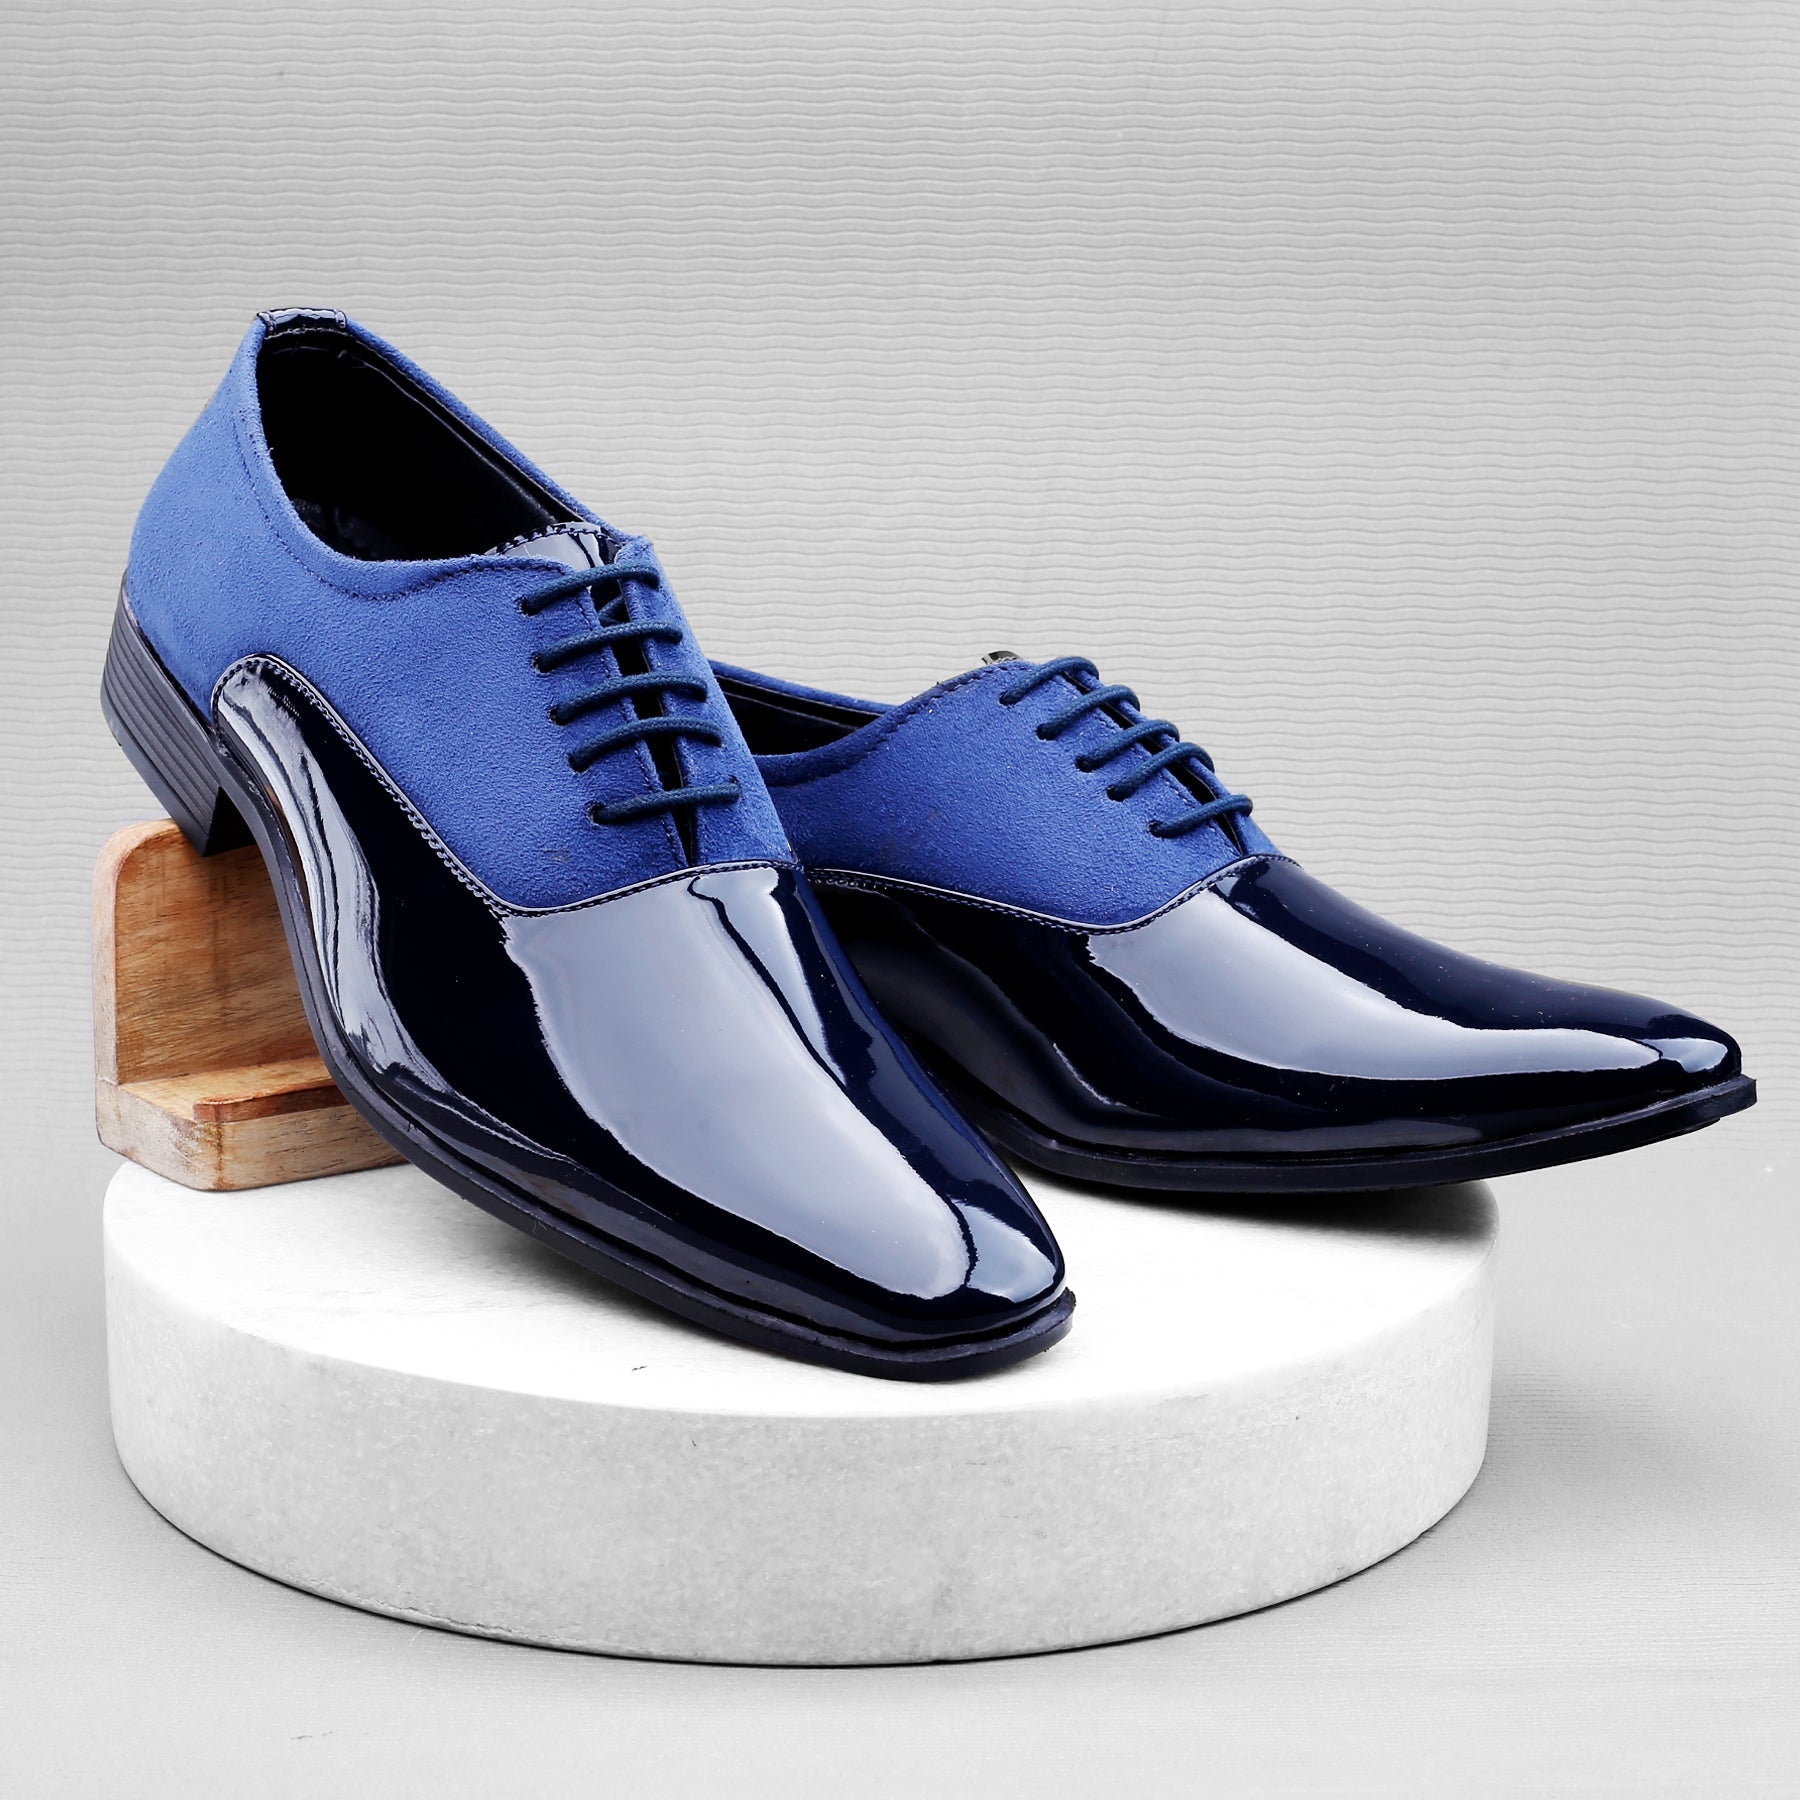 FunkyTradition Classy Office, Wedding, Party Wear Blue Shoes With Lace-Up